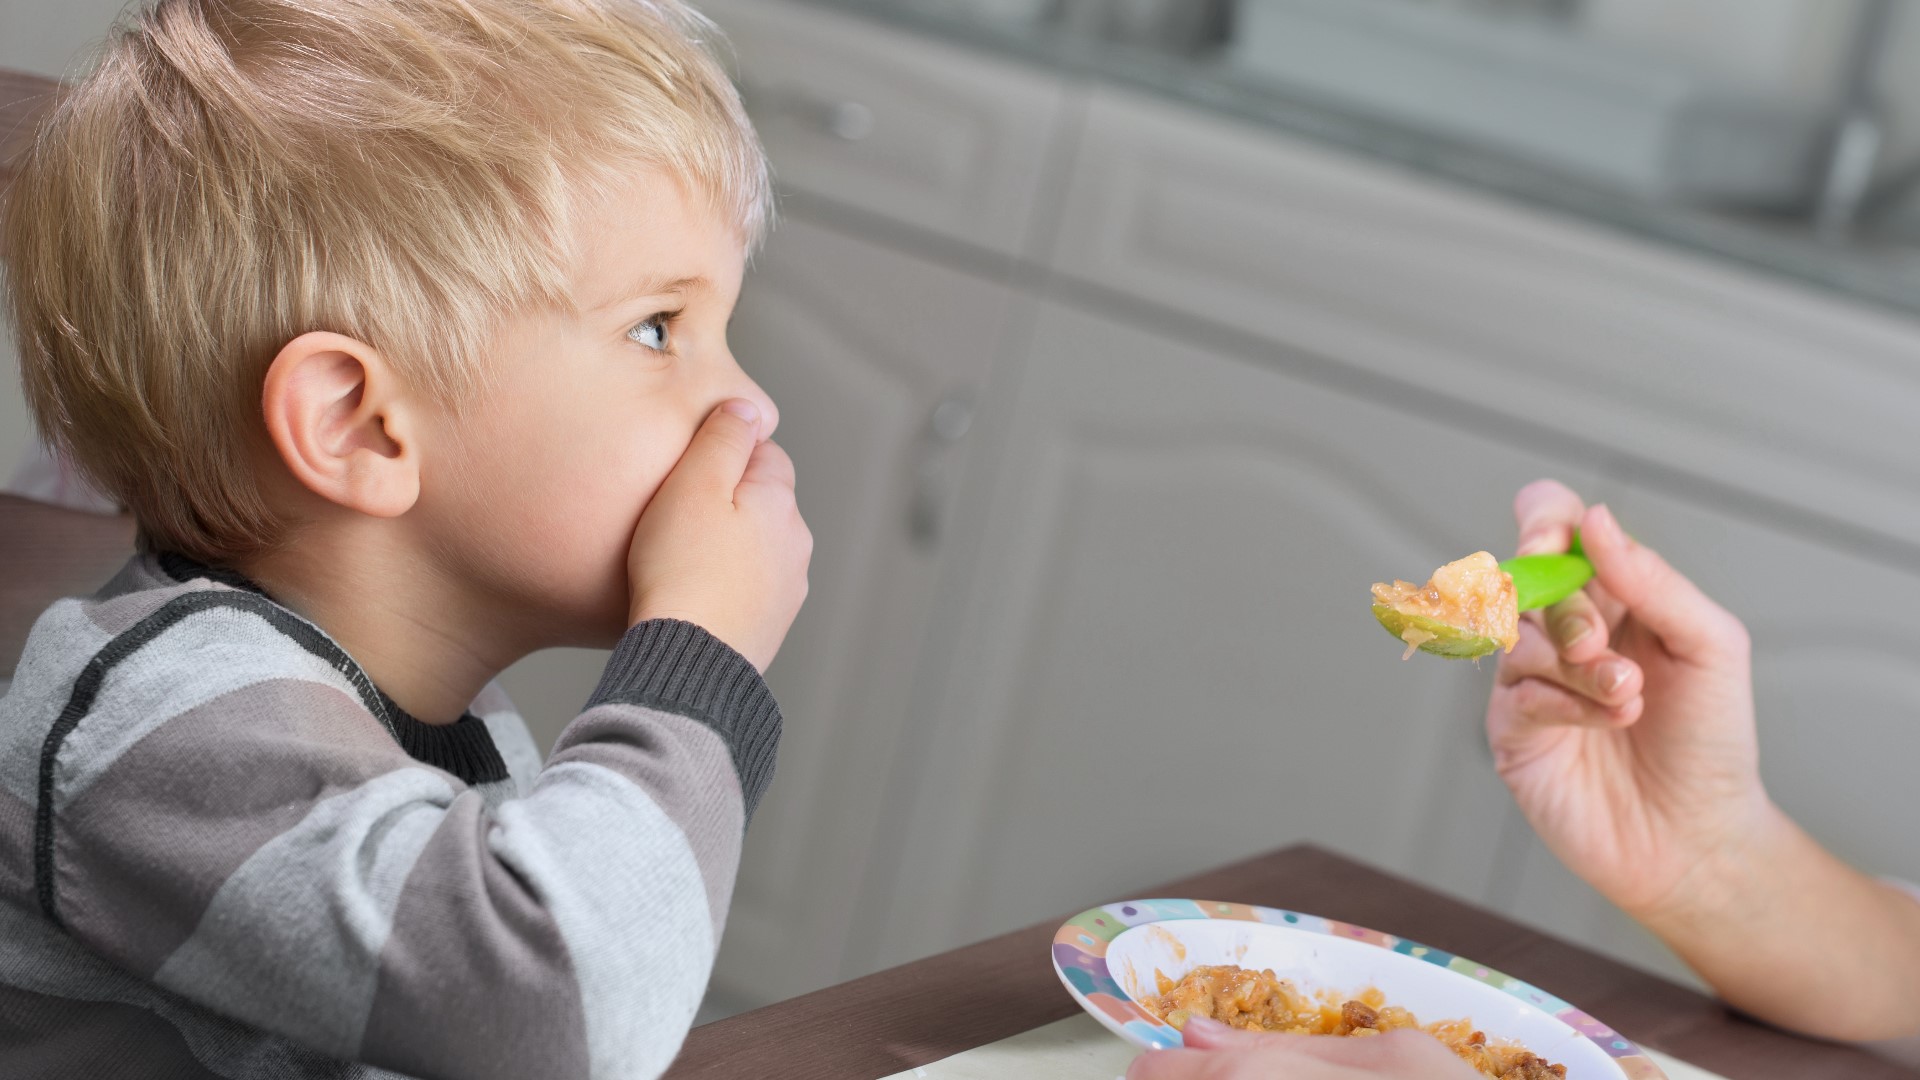 Getting kids to eat healthily can be a challenge, but there are some steps parents can take to help.